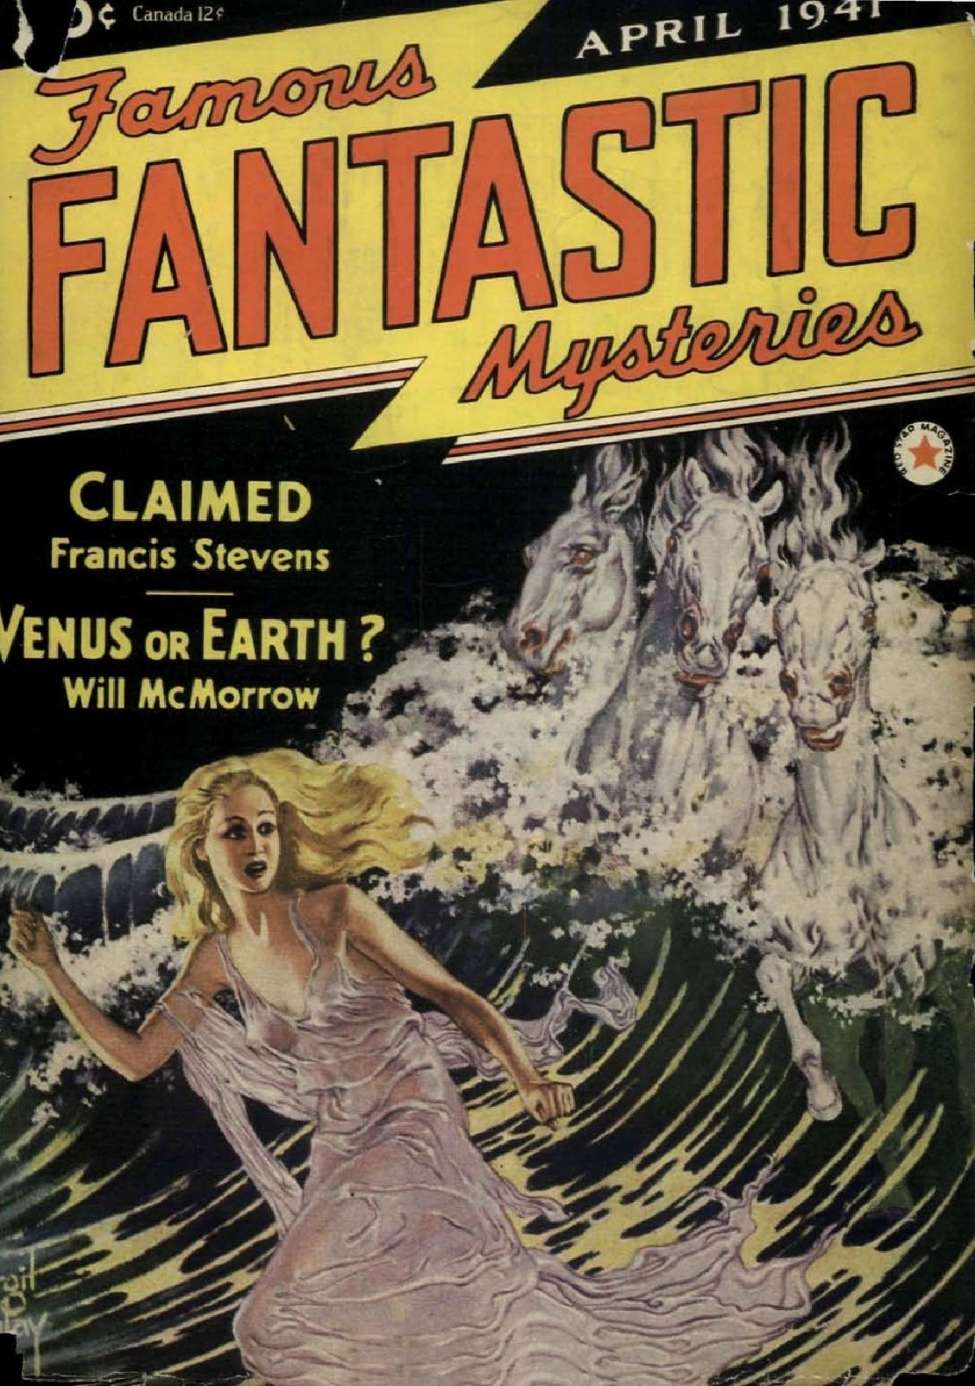 Comic Book Cover For Famous Fantastic Mysteries v3 1 - Claimed - Francis Stevens